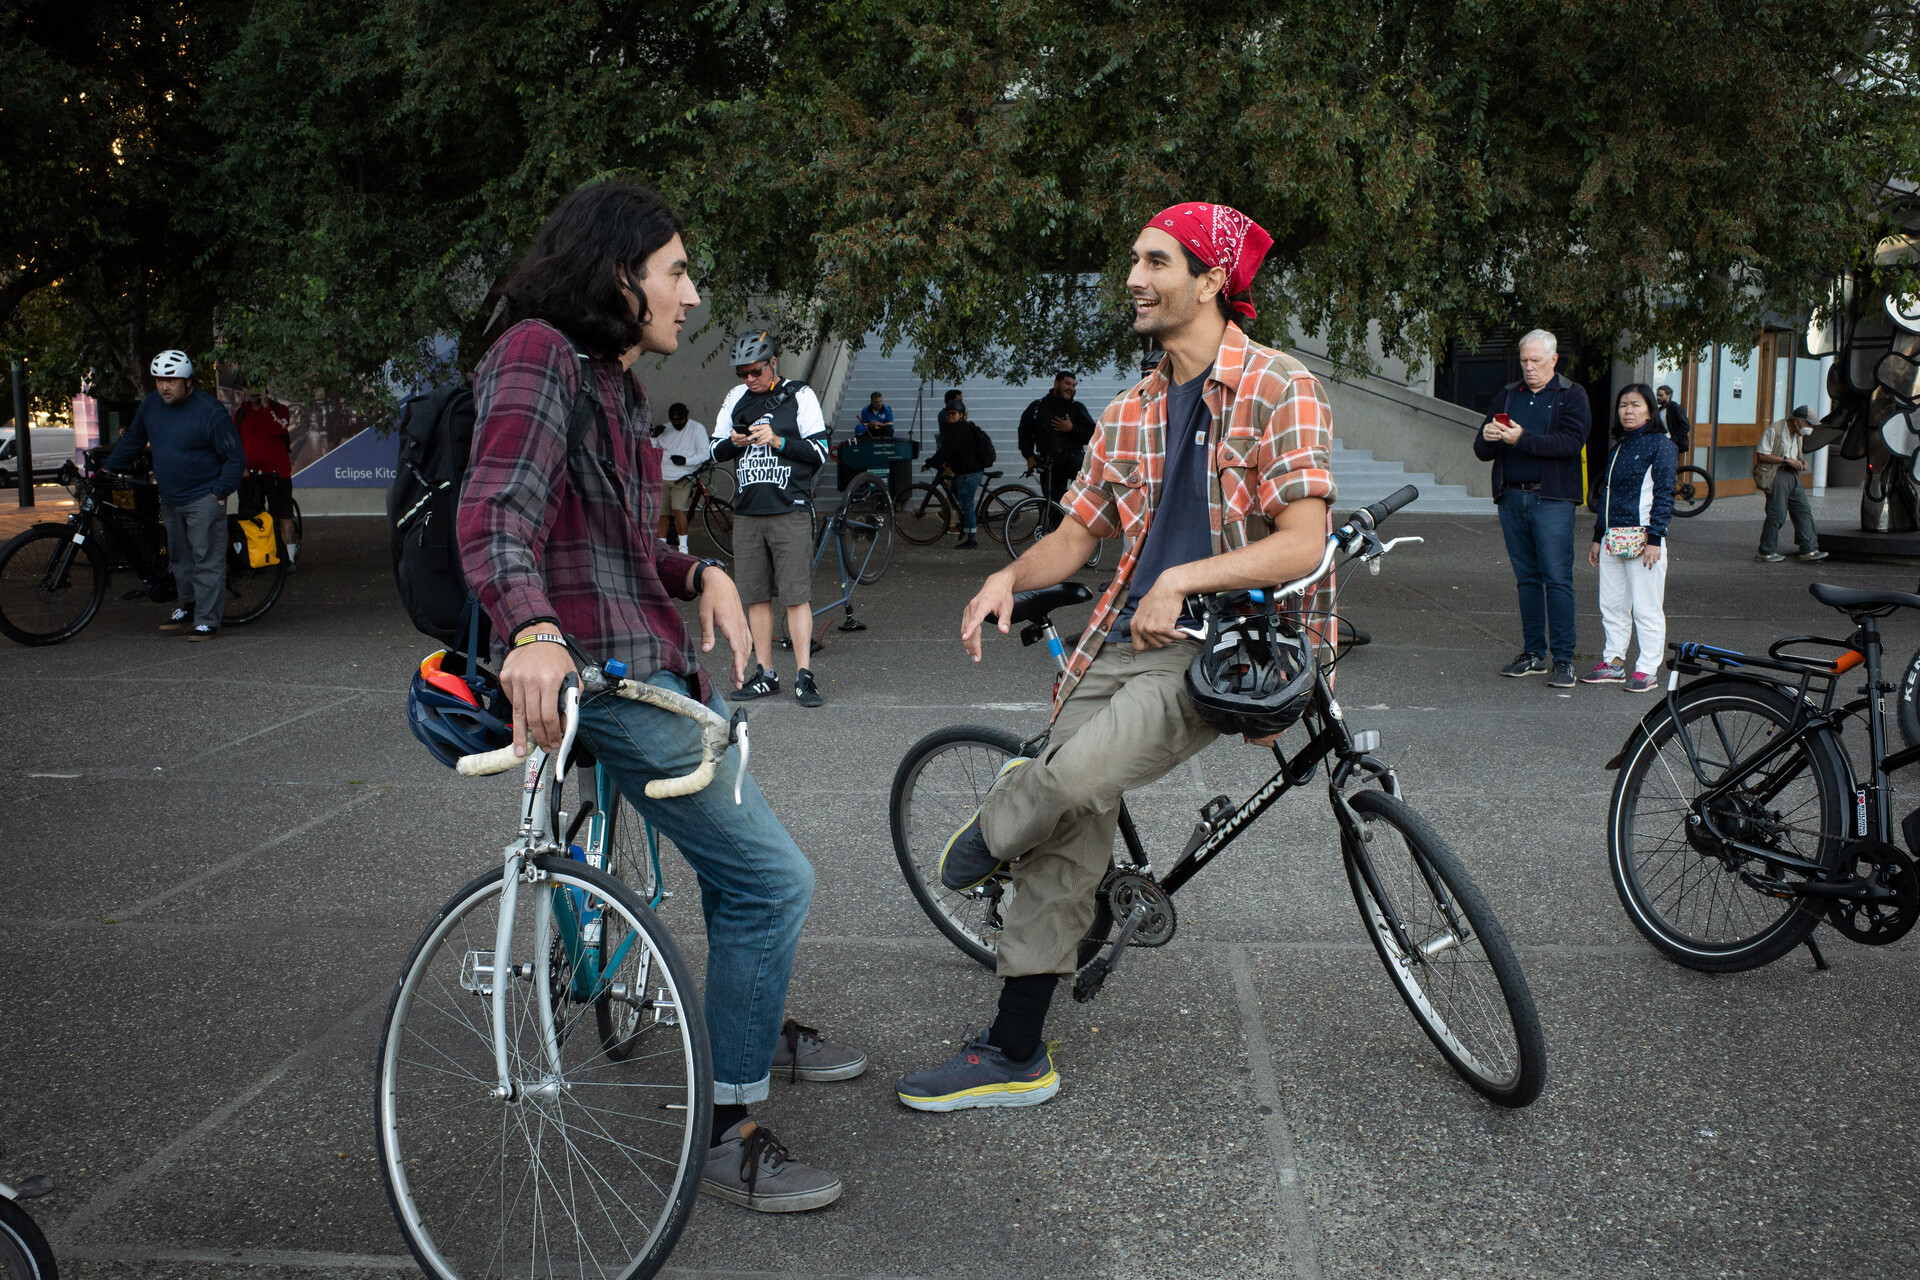 Two men leaning on their bikes have a chat, one has long hair, the other is wearing a red bandana, both are in the early 20s.